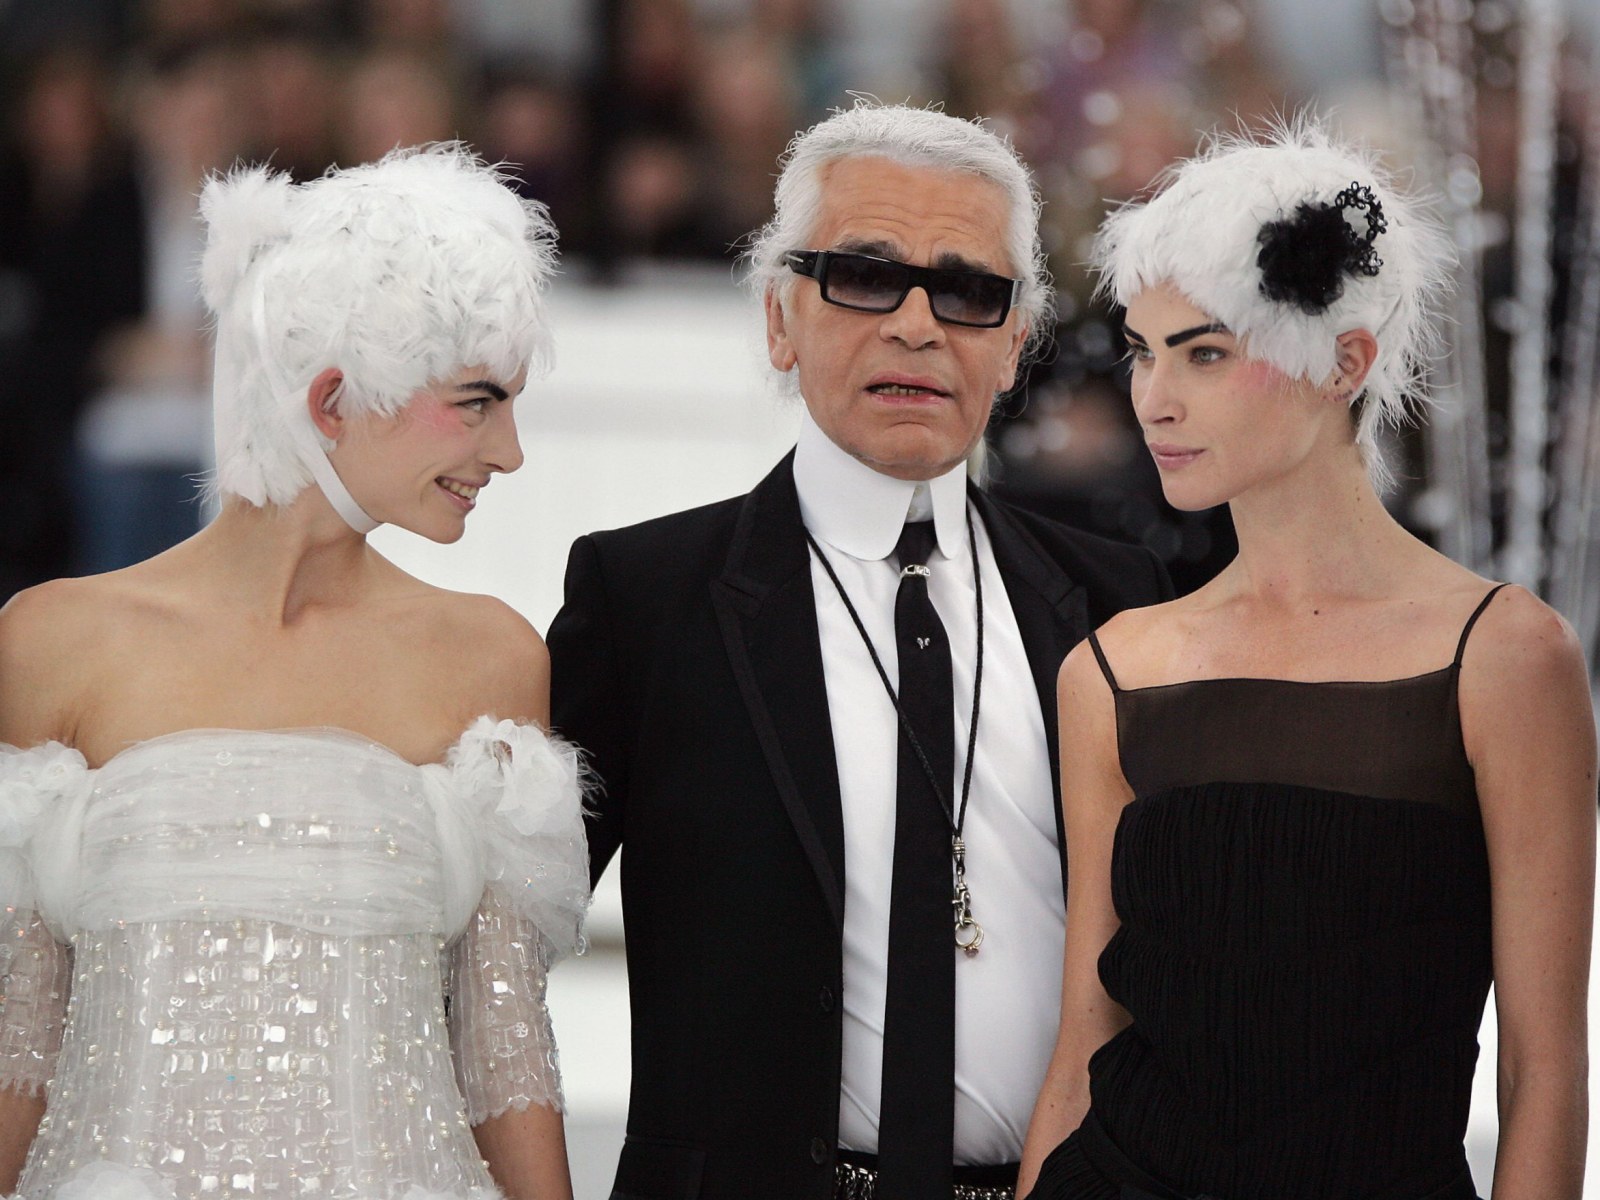 Karl Lagerfeld's Fashion Legacy: Designer's Greatest Creations in